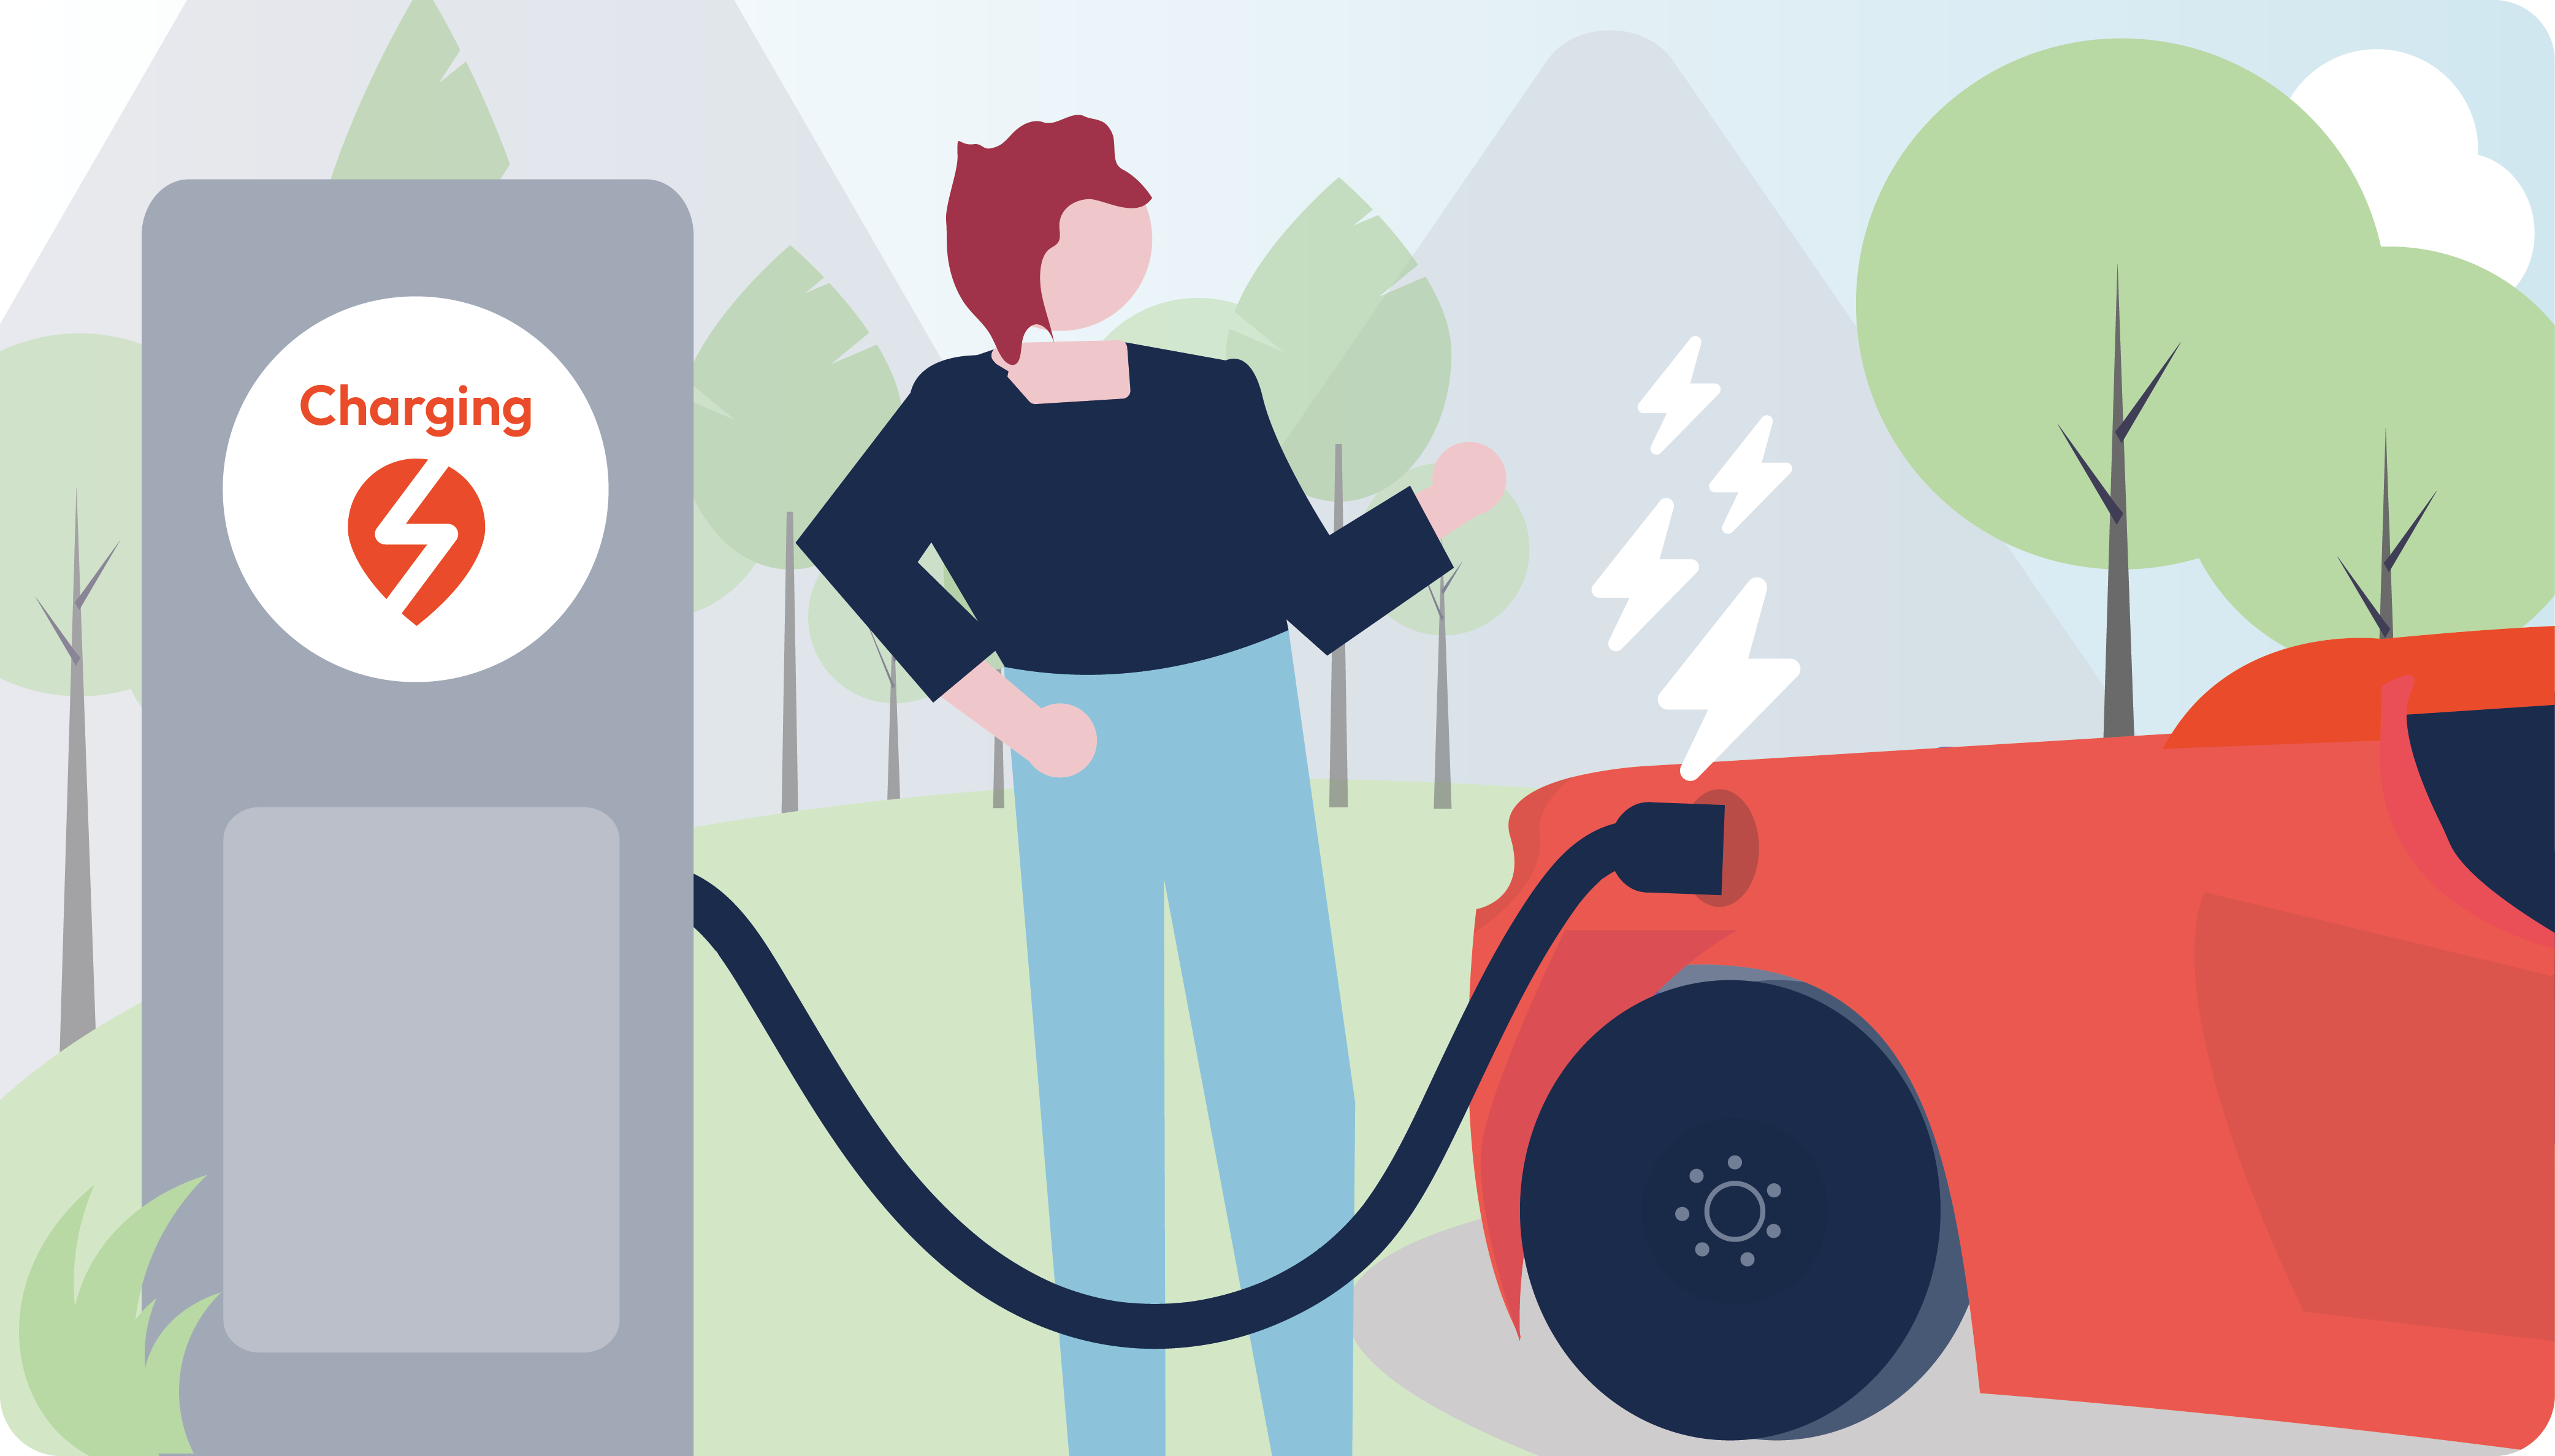 Charging an electric vehicle - Best practice